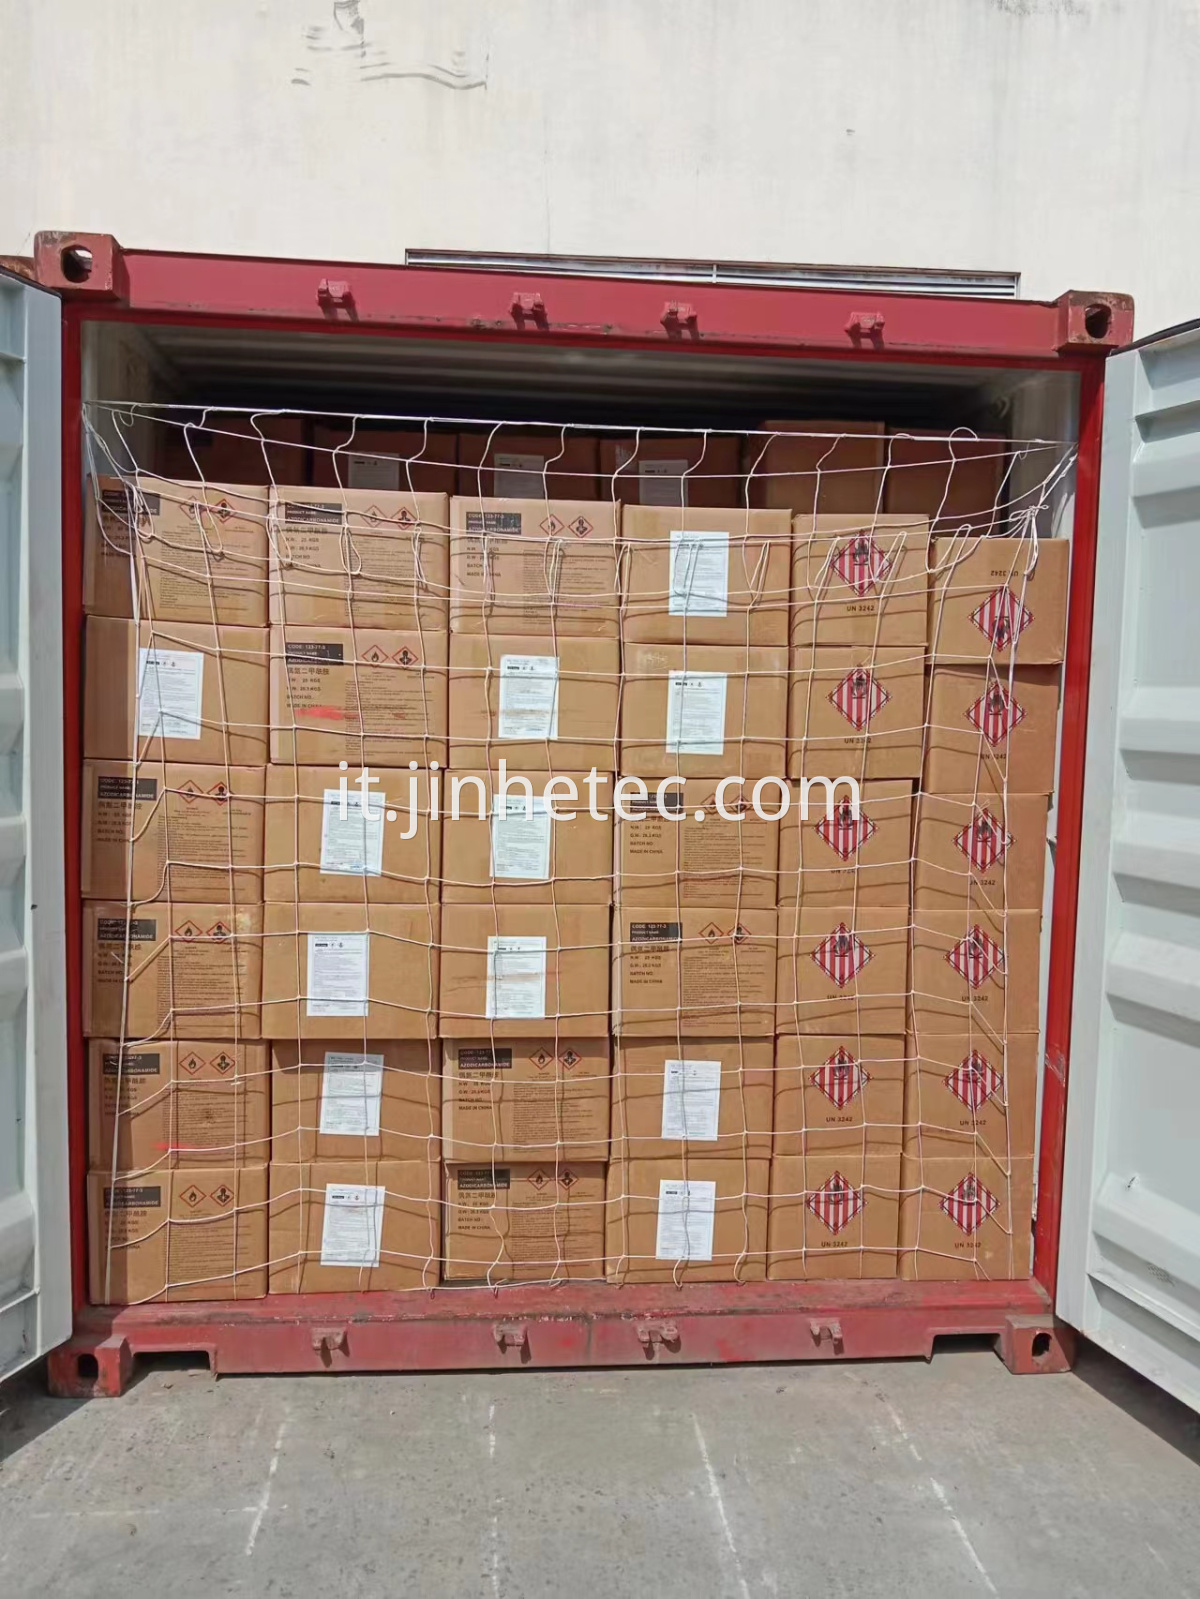 Adc-1000 Blowing Agent Azodicarbonamide For Pvc, Pp